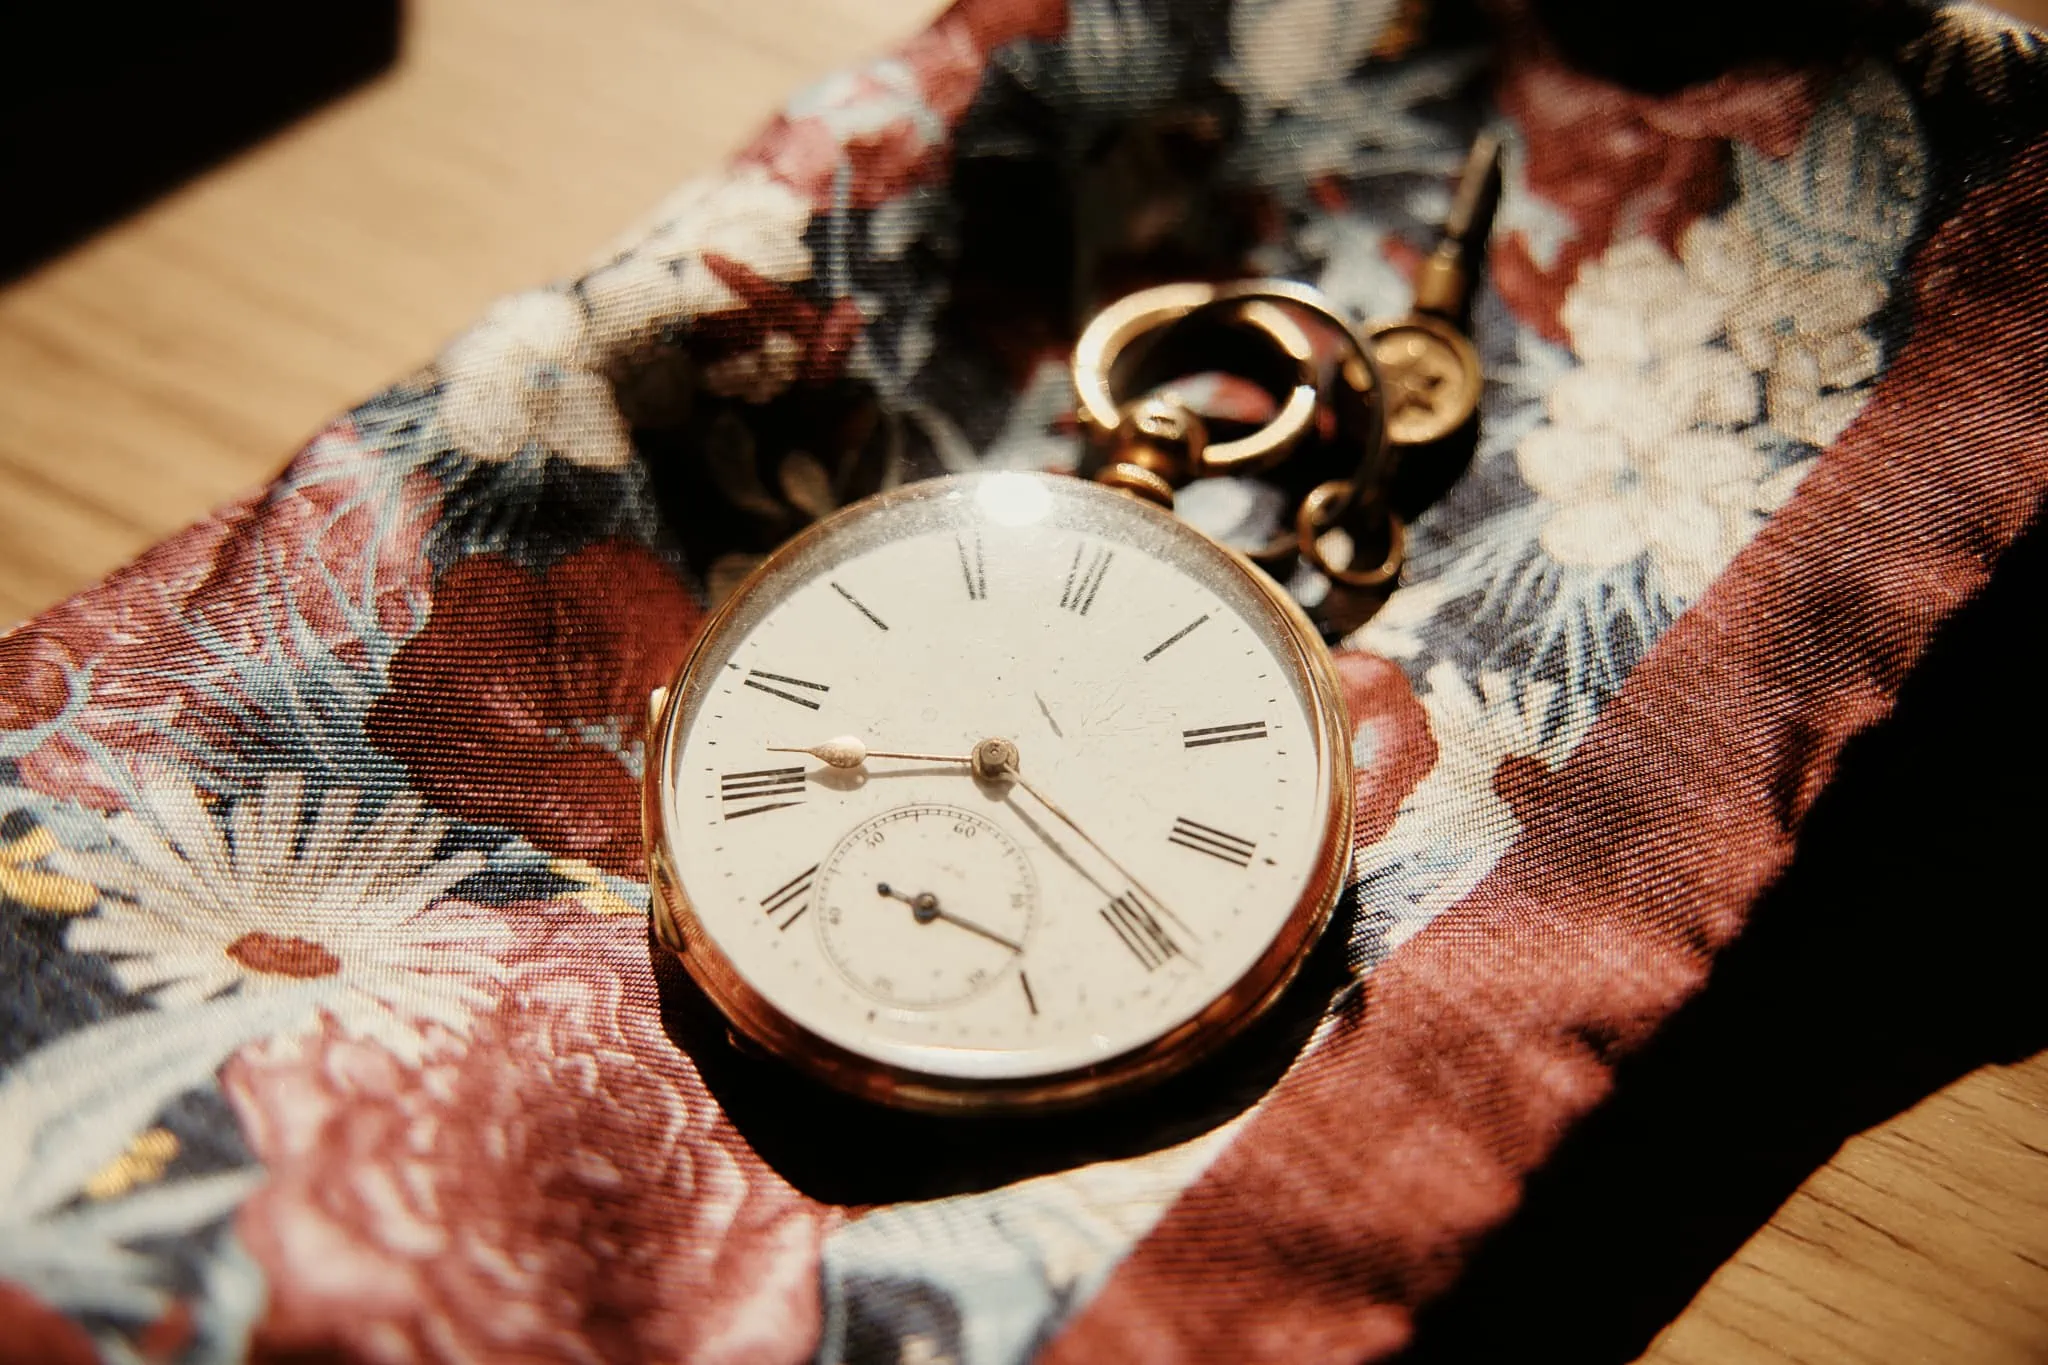 Claire and Rob's elopement wedding at Cecil Peak featuring a pocket watch on a piece of fabric.